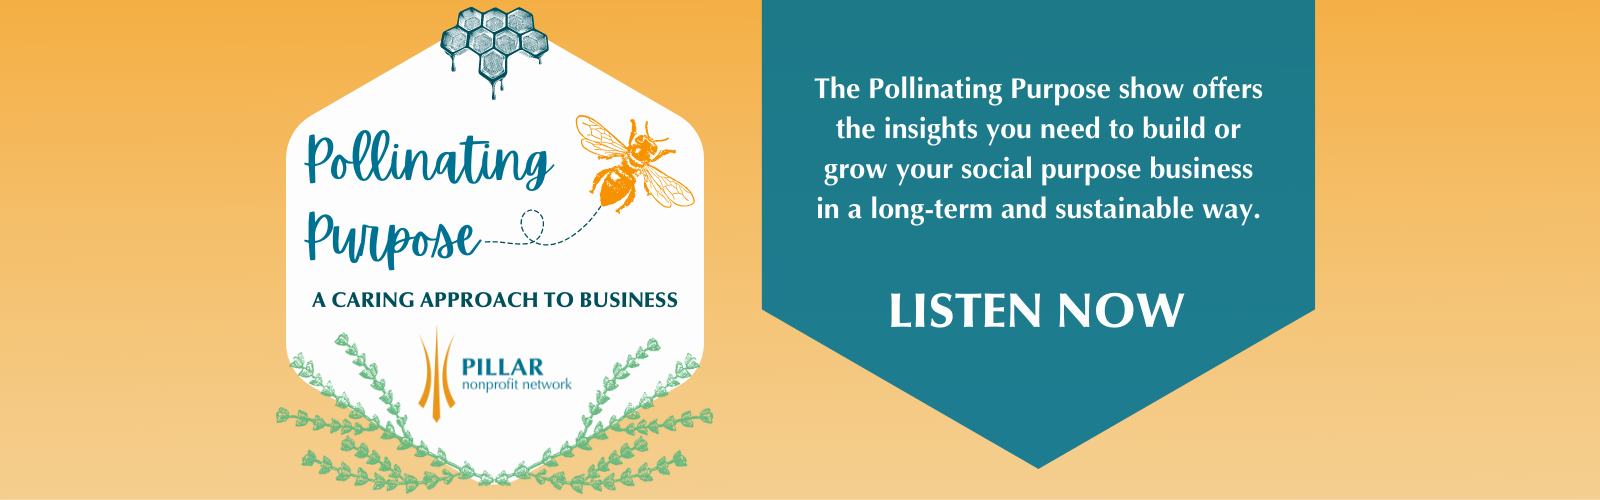 The Pollinating Purpose show offers the insights you need to build or grow your social purpose business in a long-term and sustainable way. Listen now.